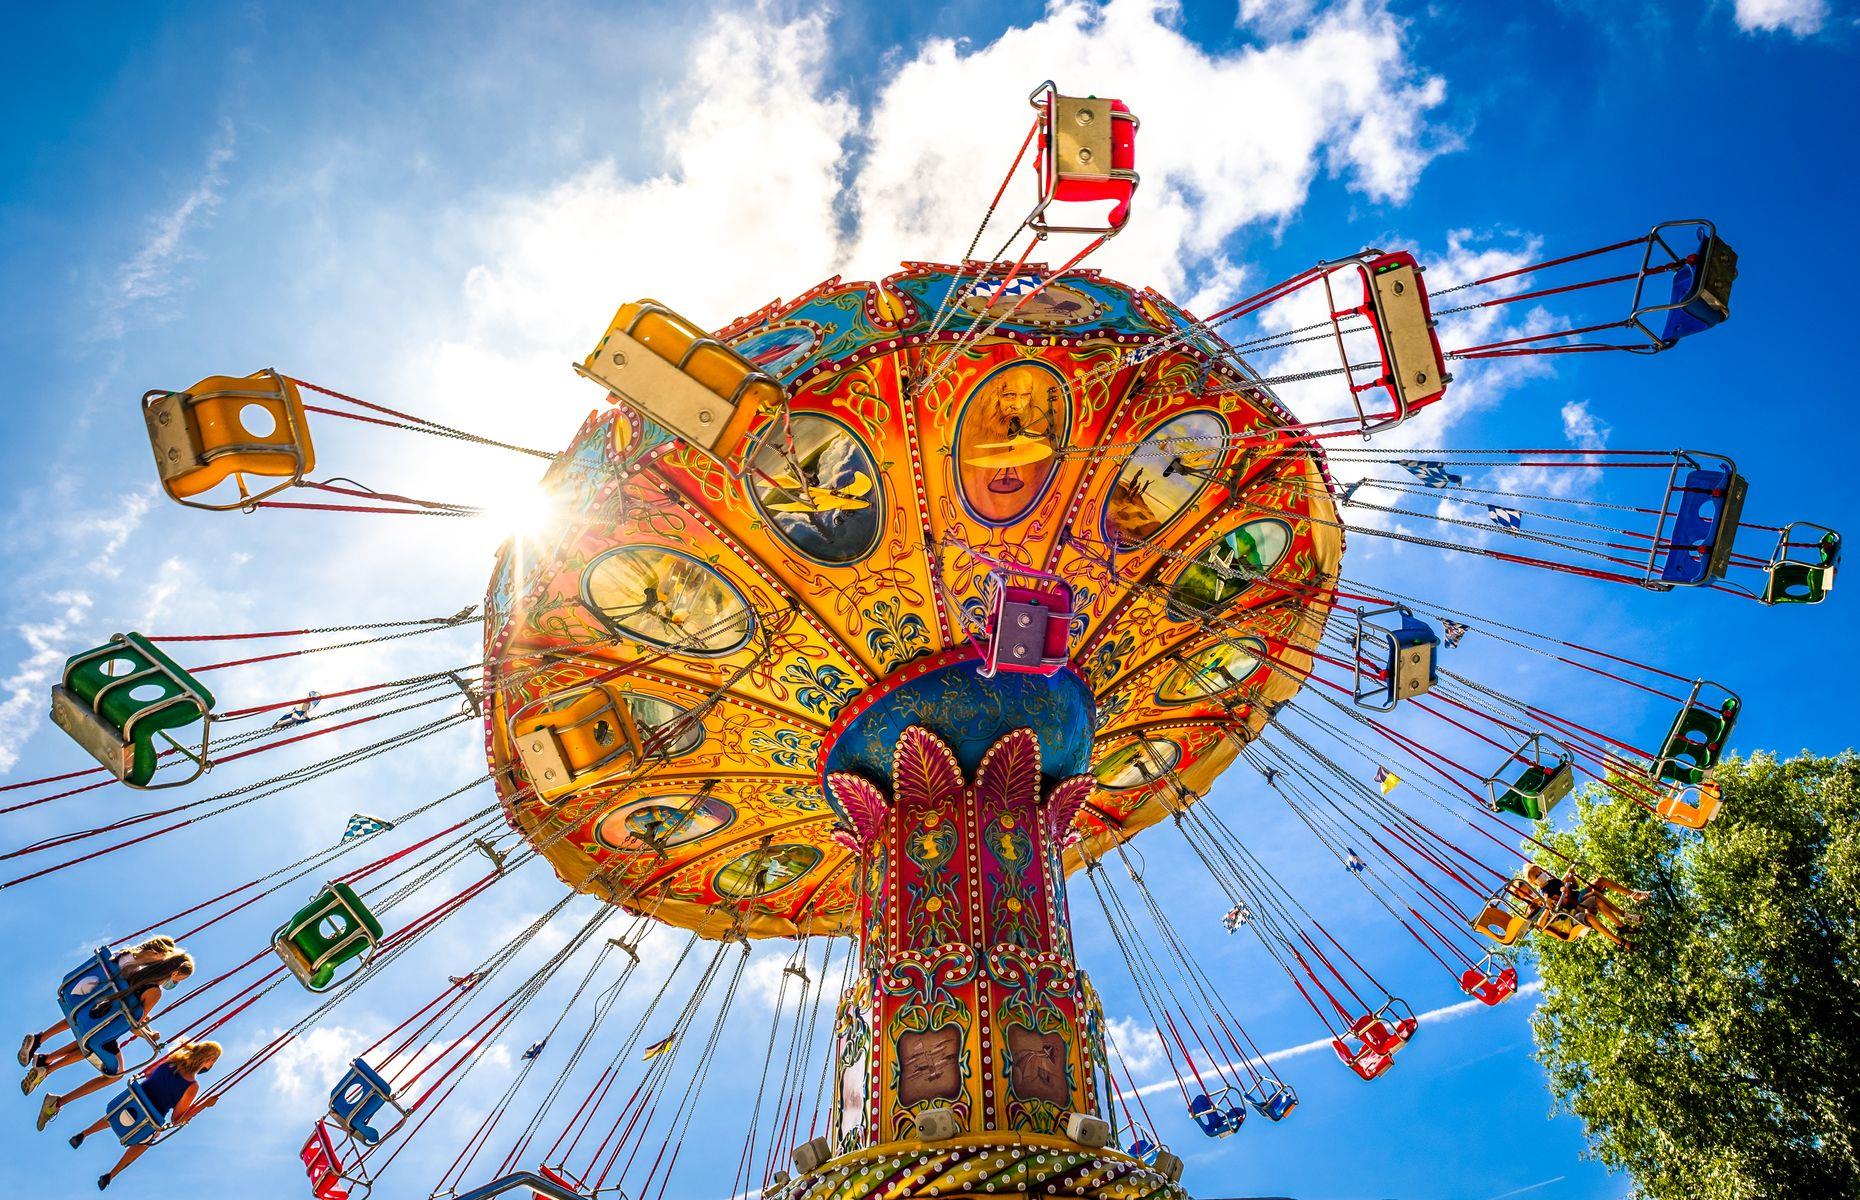 <p>Vienna’s <a href="https://www.praterwien.com/en/home">Prater park</a> may be best-known for its 212-foot (65m) Riesenrad ferris wheel, but in its shadow lies the Wurstelprater – one of Europe’s best amusement parks. Part traditional Victorian funfair, part 21st-century theme park, you’ll find everything from mini-golf, a Madame Tussauds and pony rides to skydiving and roller coasters. In the summer, the park is usually buzzing with life until about 10pm, and there's no admission fee: you simply pick a ride, pay, then enjoy.</p>